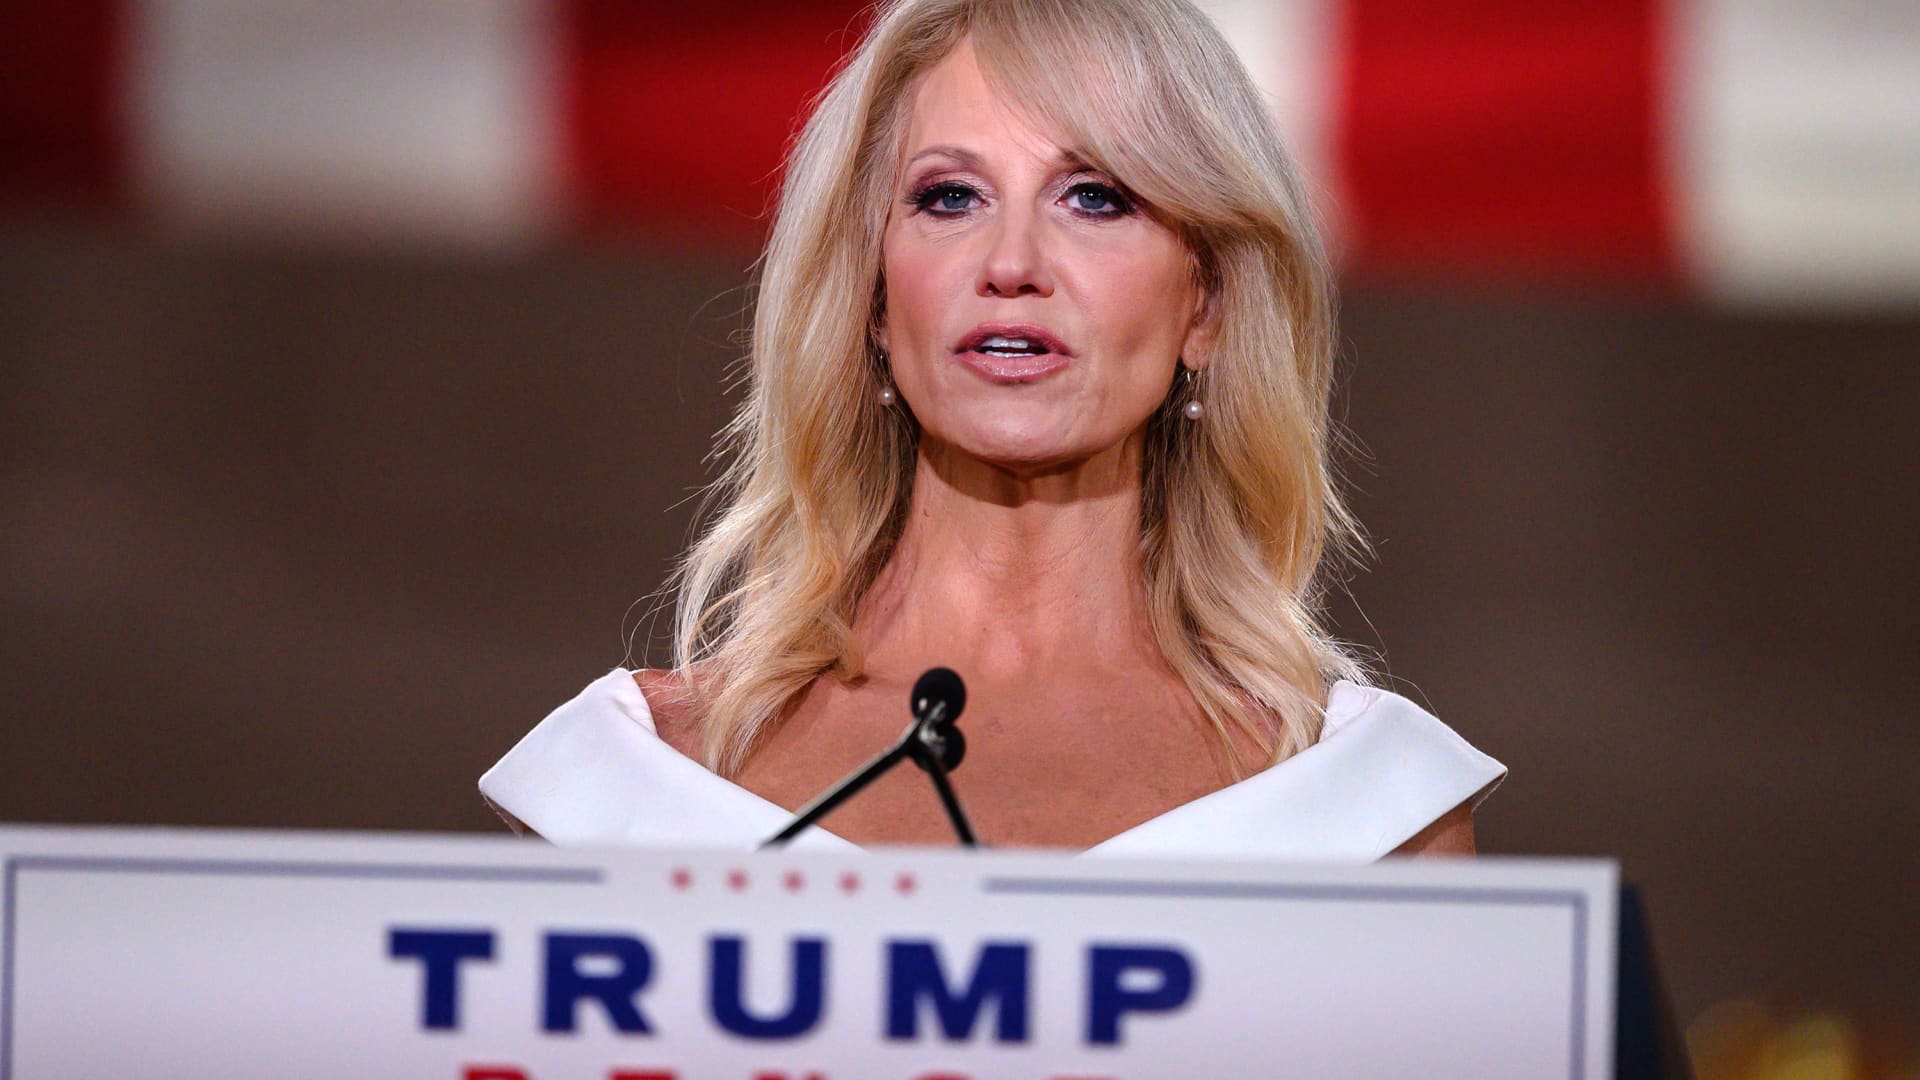 Trump ex-aide Kellyanne Conway deposed by Jan.  6 Capitol riots committee
– News X